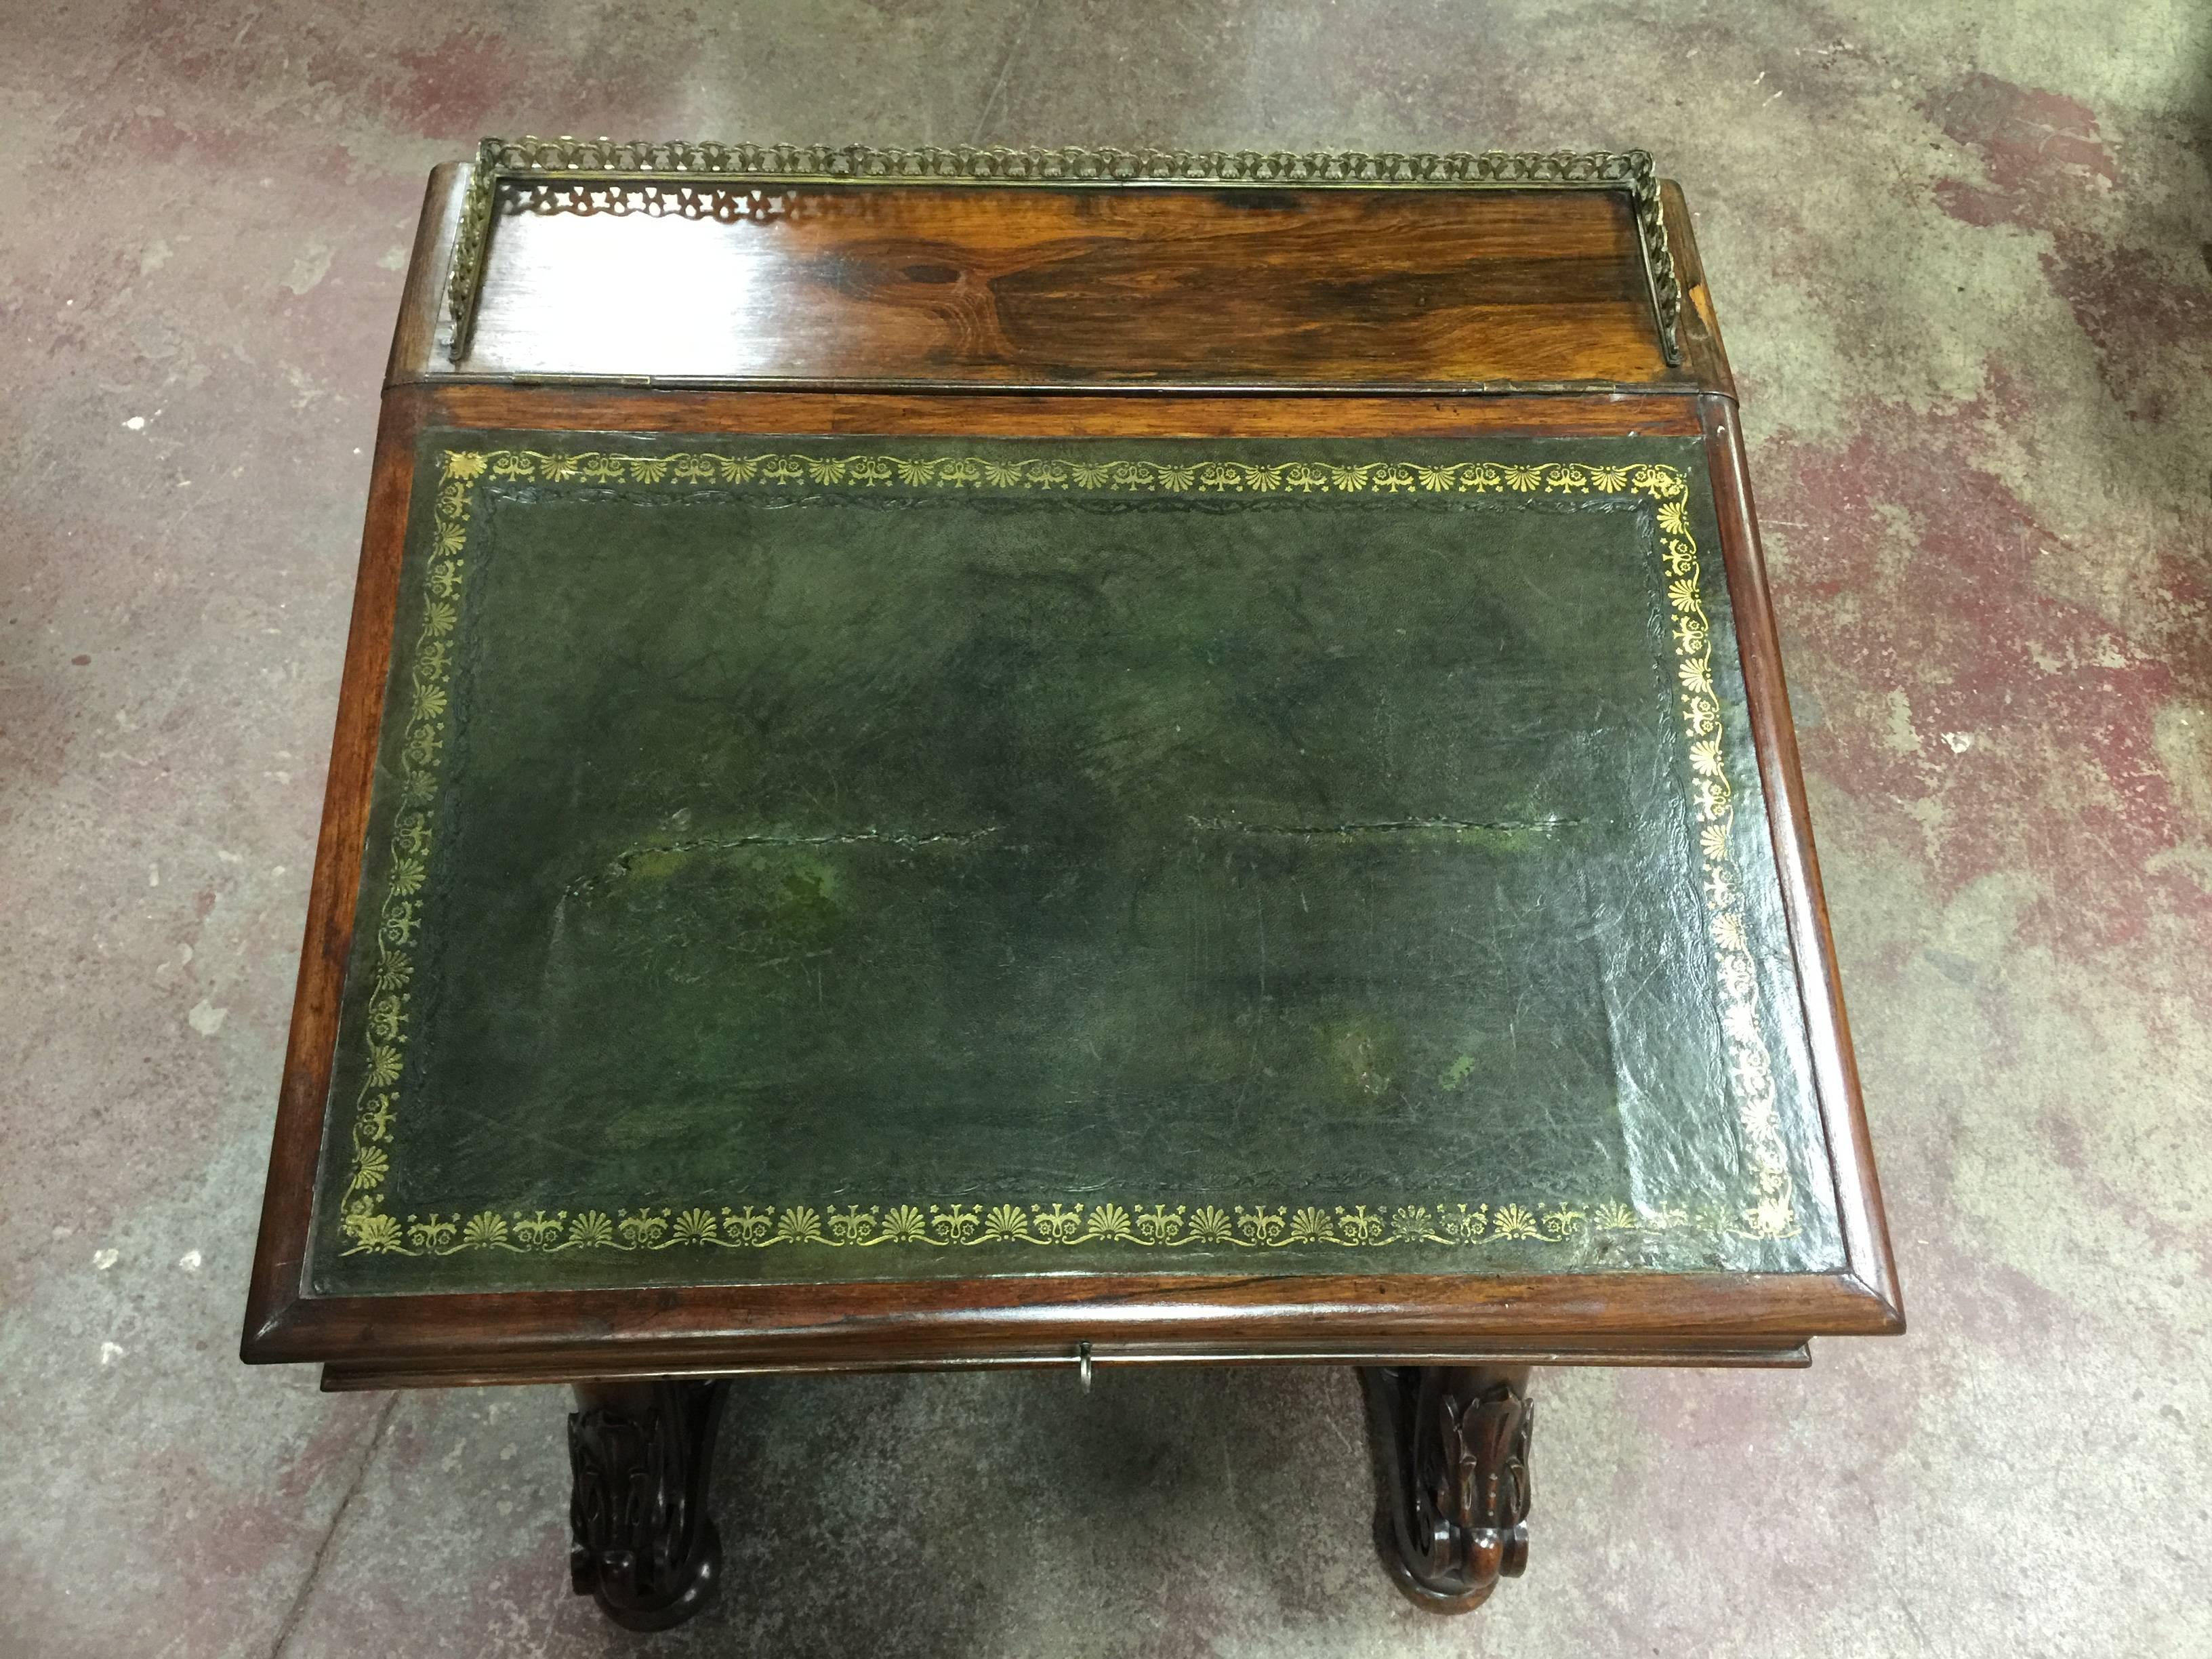 Victorian Desk Mid-19th Century Davenport  with Original Leather Top